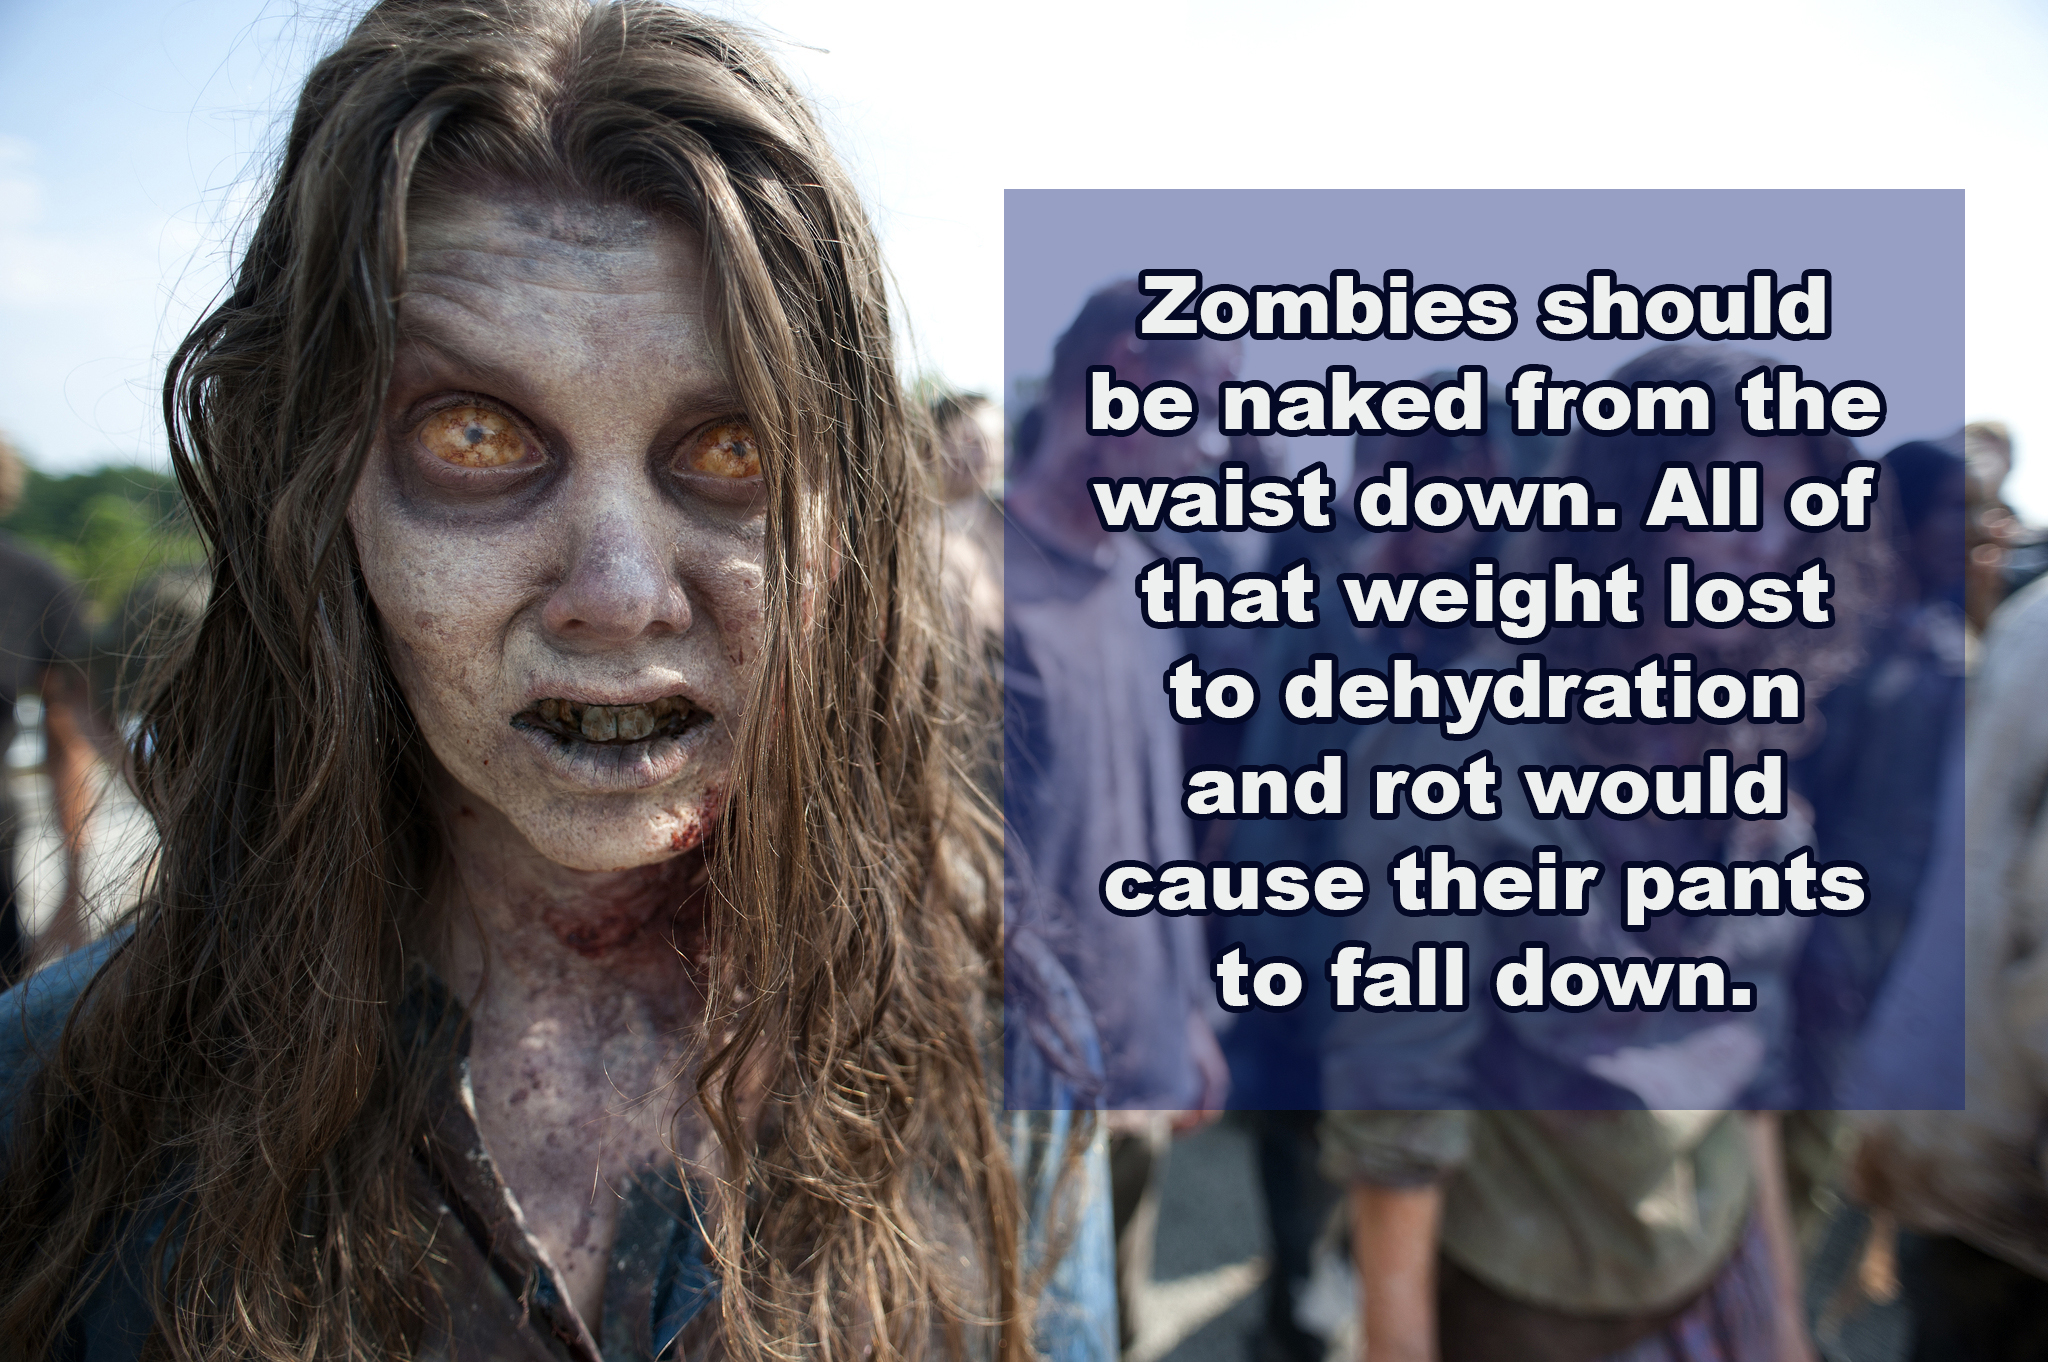 making of walking dead zombies - Zombies should be naked from the waist down. All of that weight lost to dehydration and rot would cause their pants to fall down.